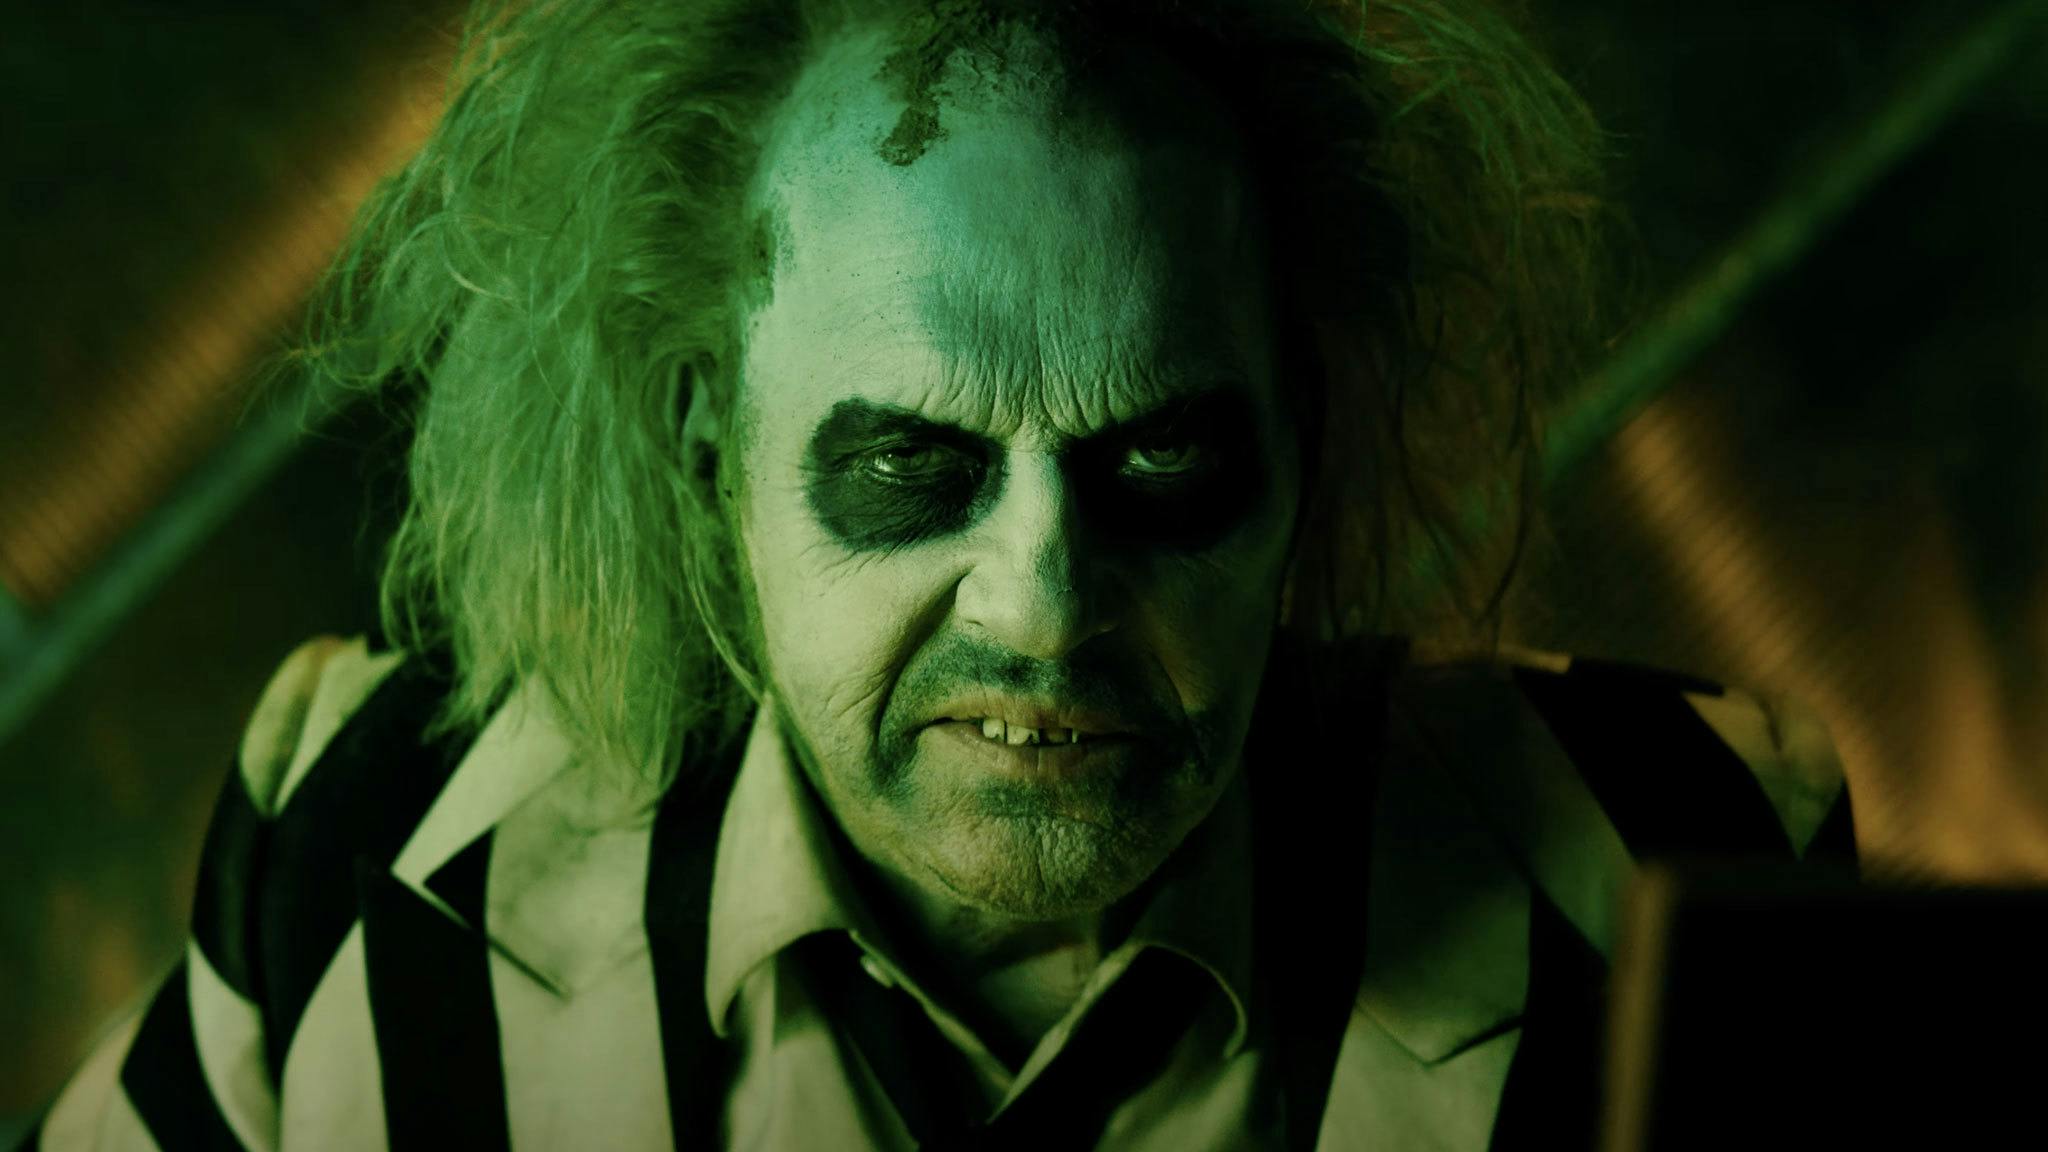 See Michael Keaton and Winona Ryder in the new teaser trailer for Beetlejuice Beetlejuice